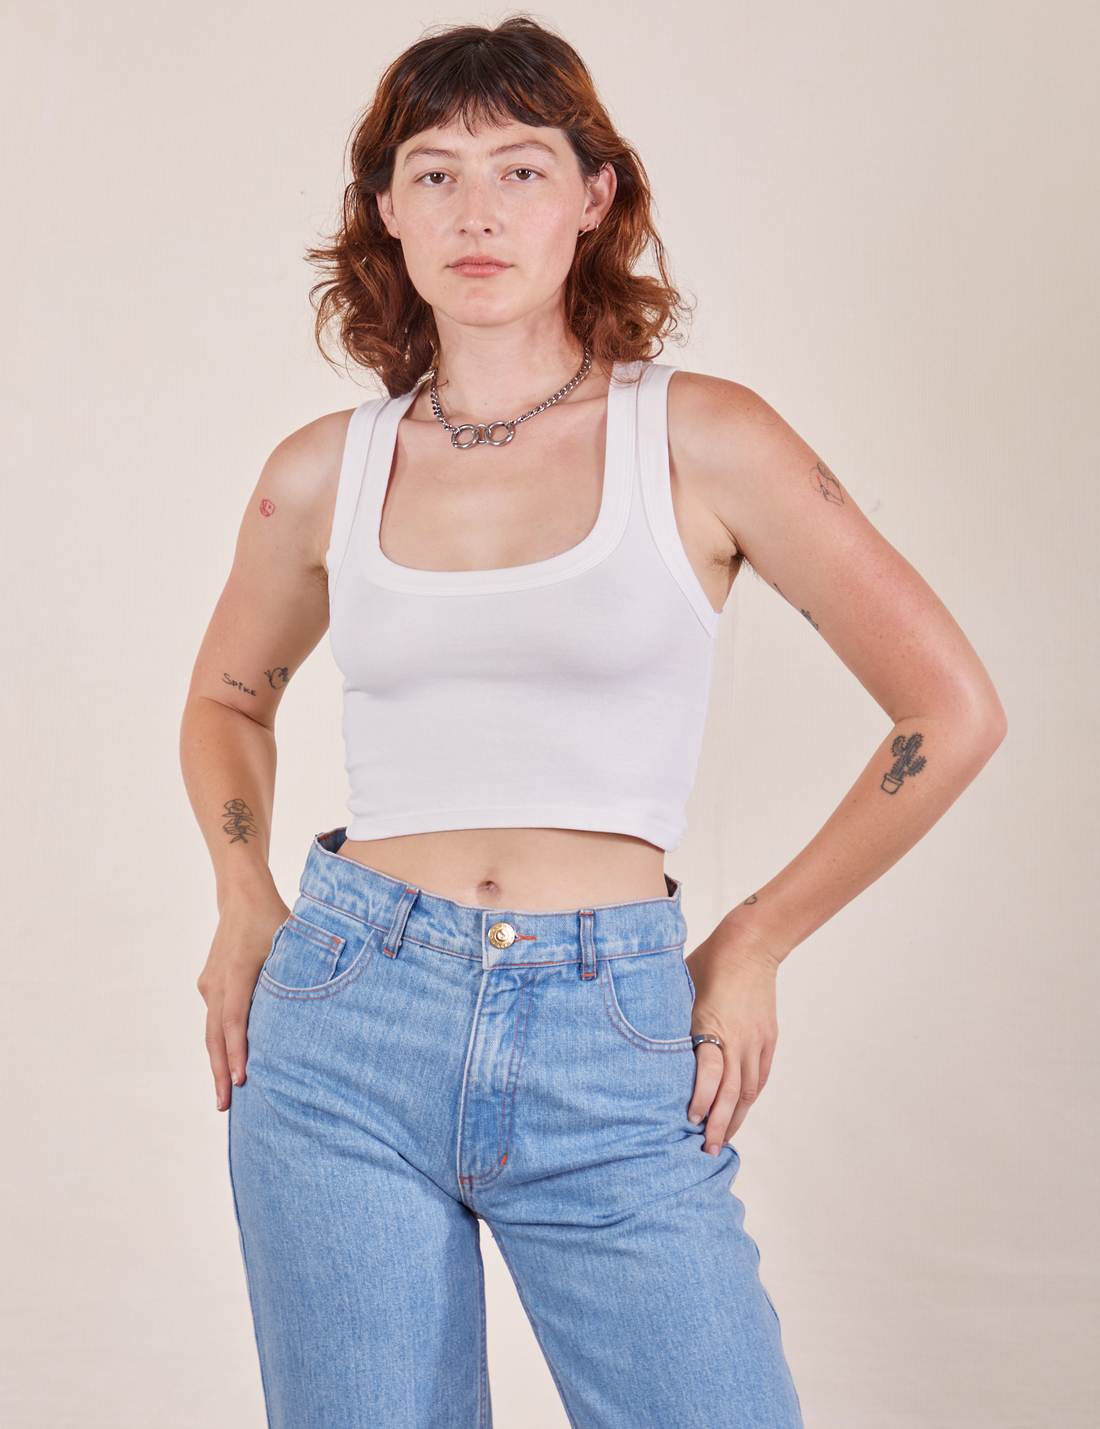 Alex is 5'8" and wearing P Cropped Tank Top in Vintage Off-White